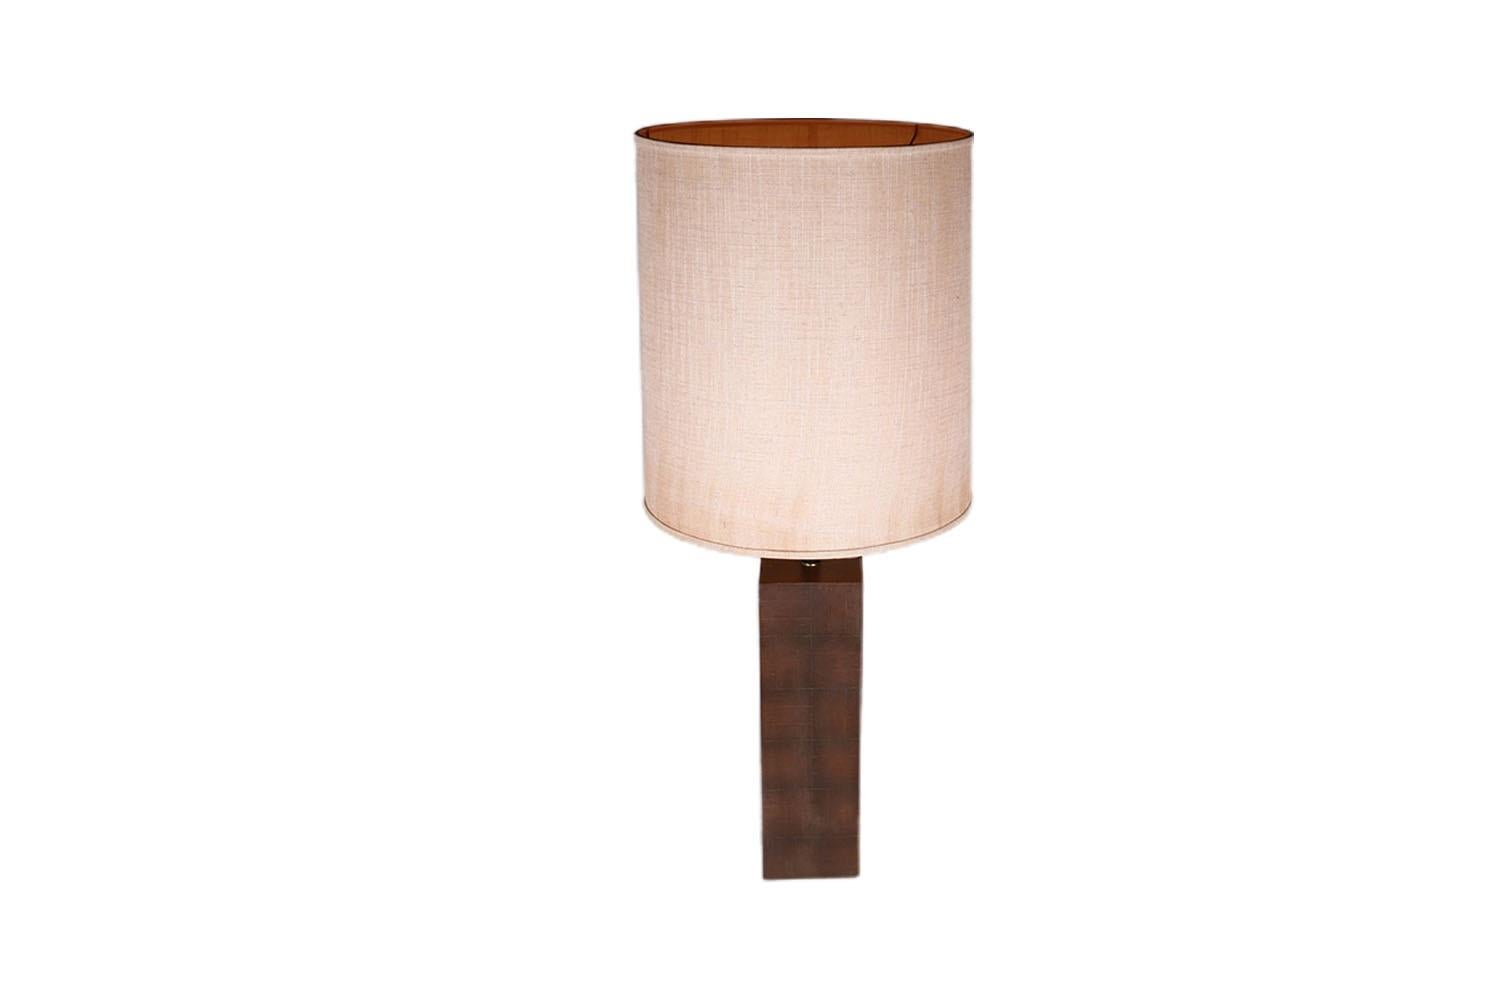 1960s Mid-Century Modern Milo Baughman style large block table lamp with original shade. Features a simple clean design in a beautifully parquet pattern, with black neck. The original wiring is fully functional with a 3-way socket.